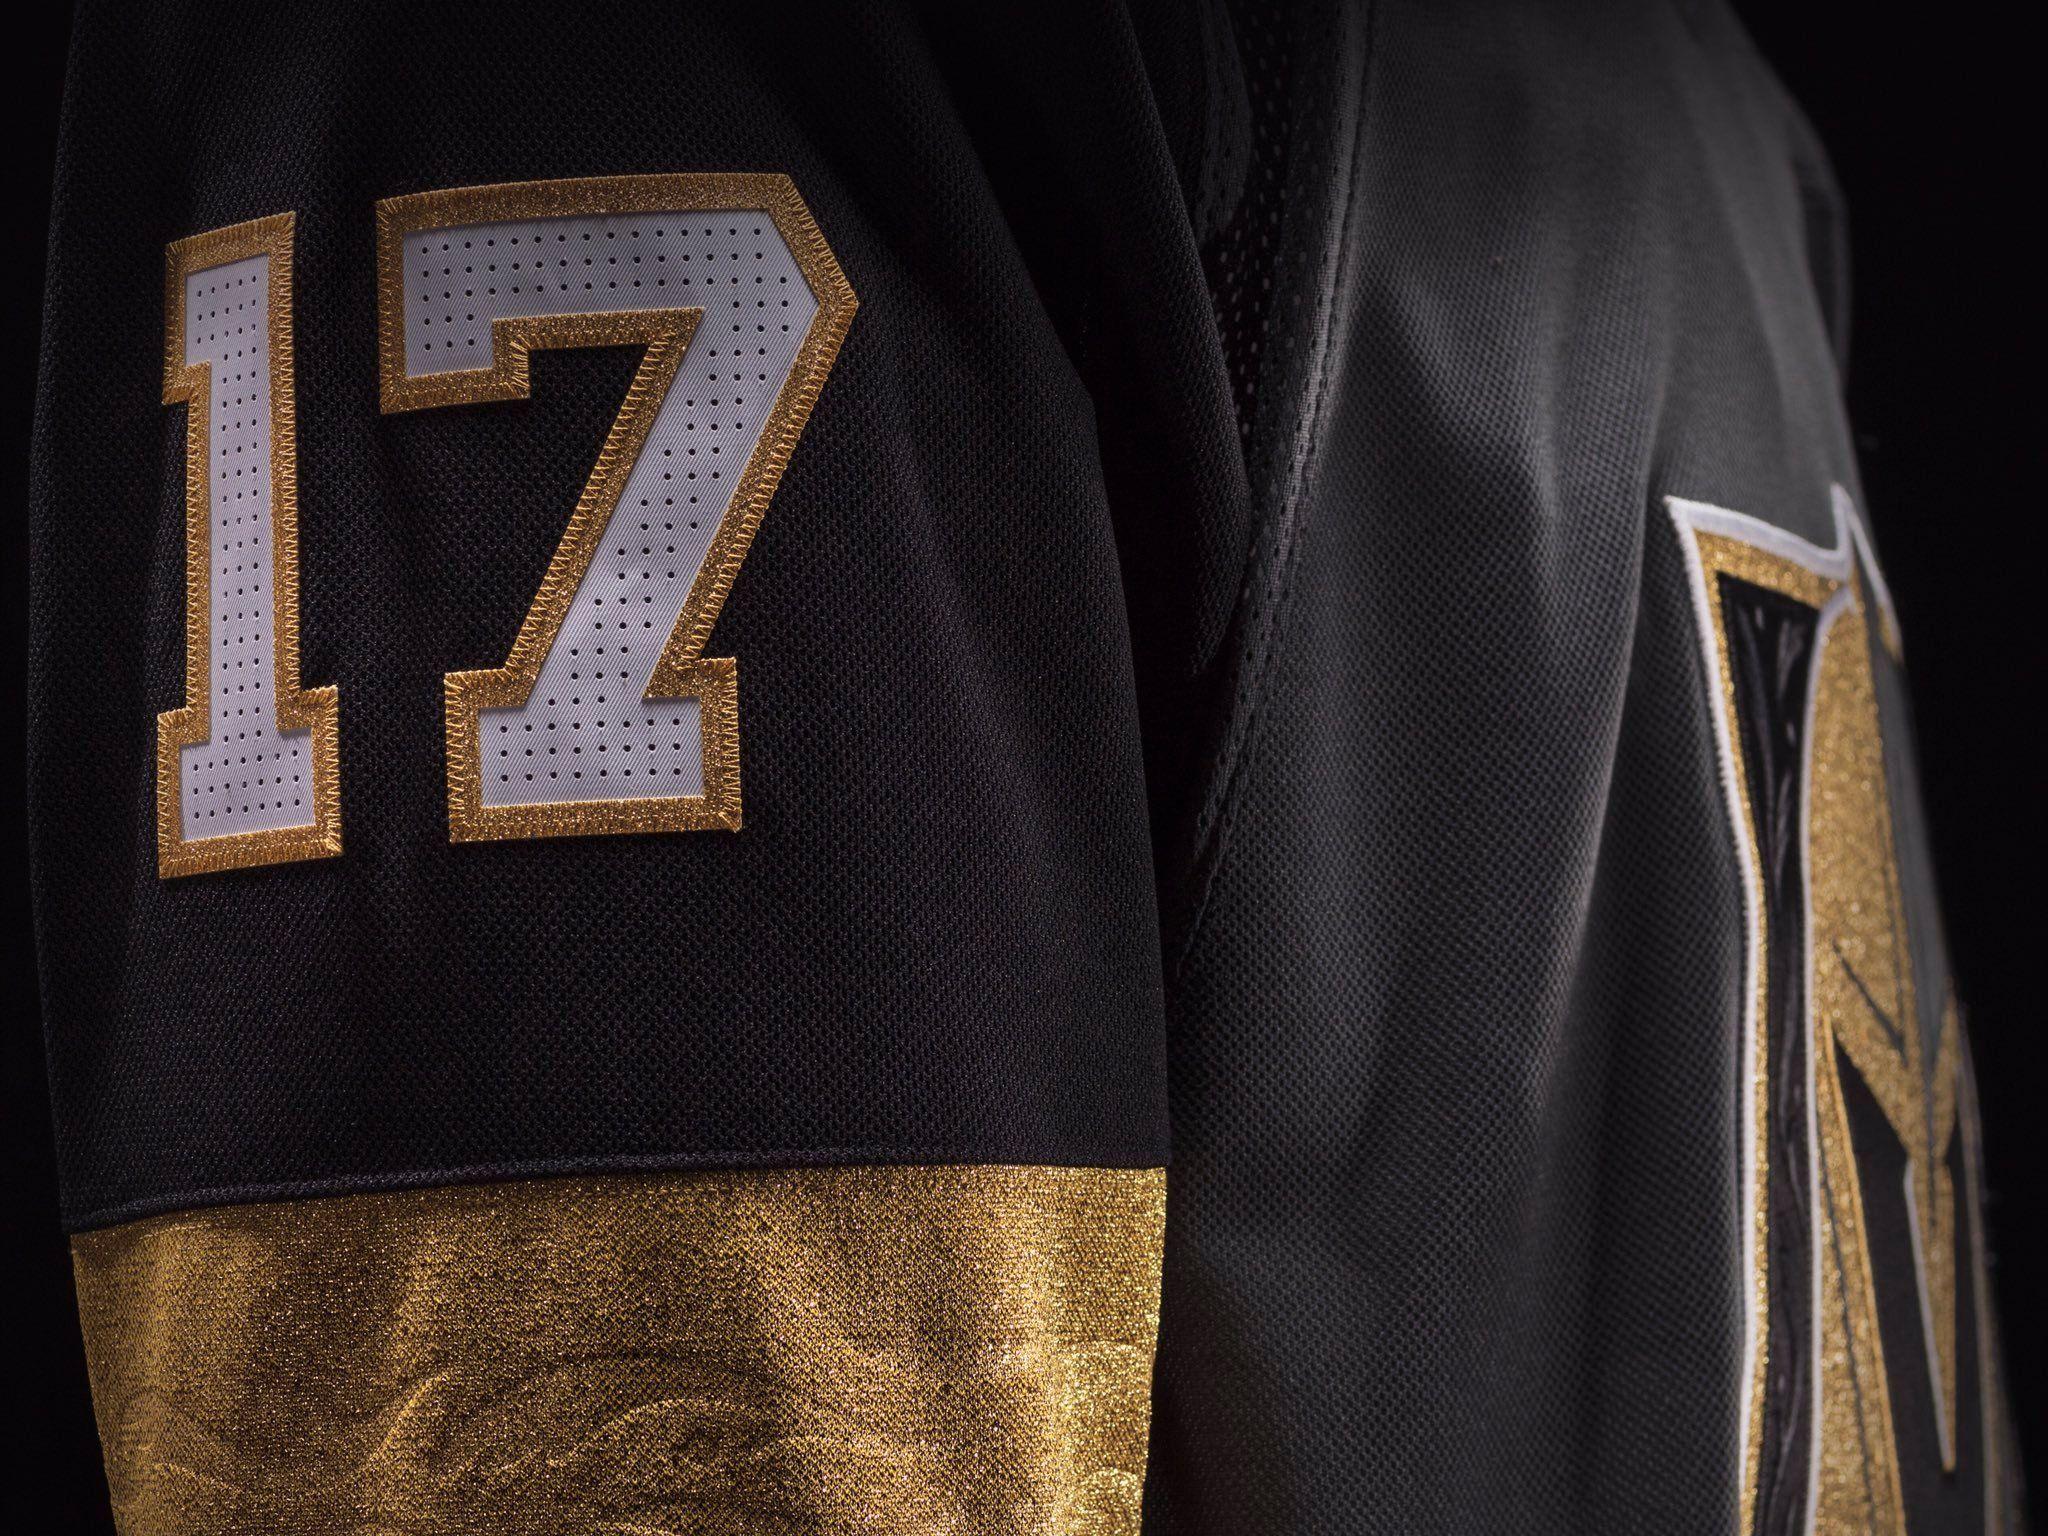 Here are the new Adidas uniforms for all 31 NHL teams Haven